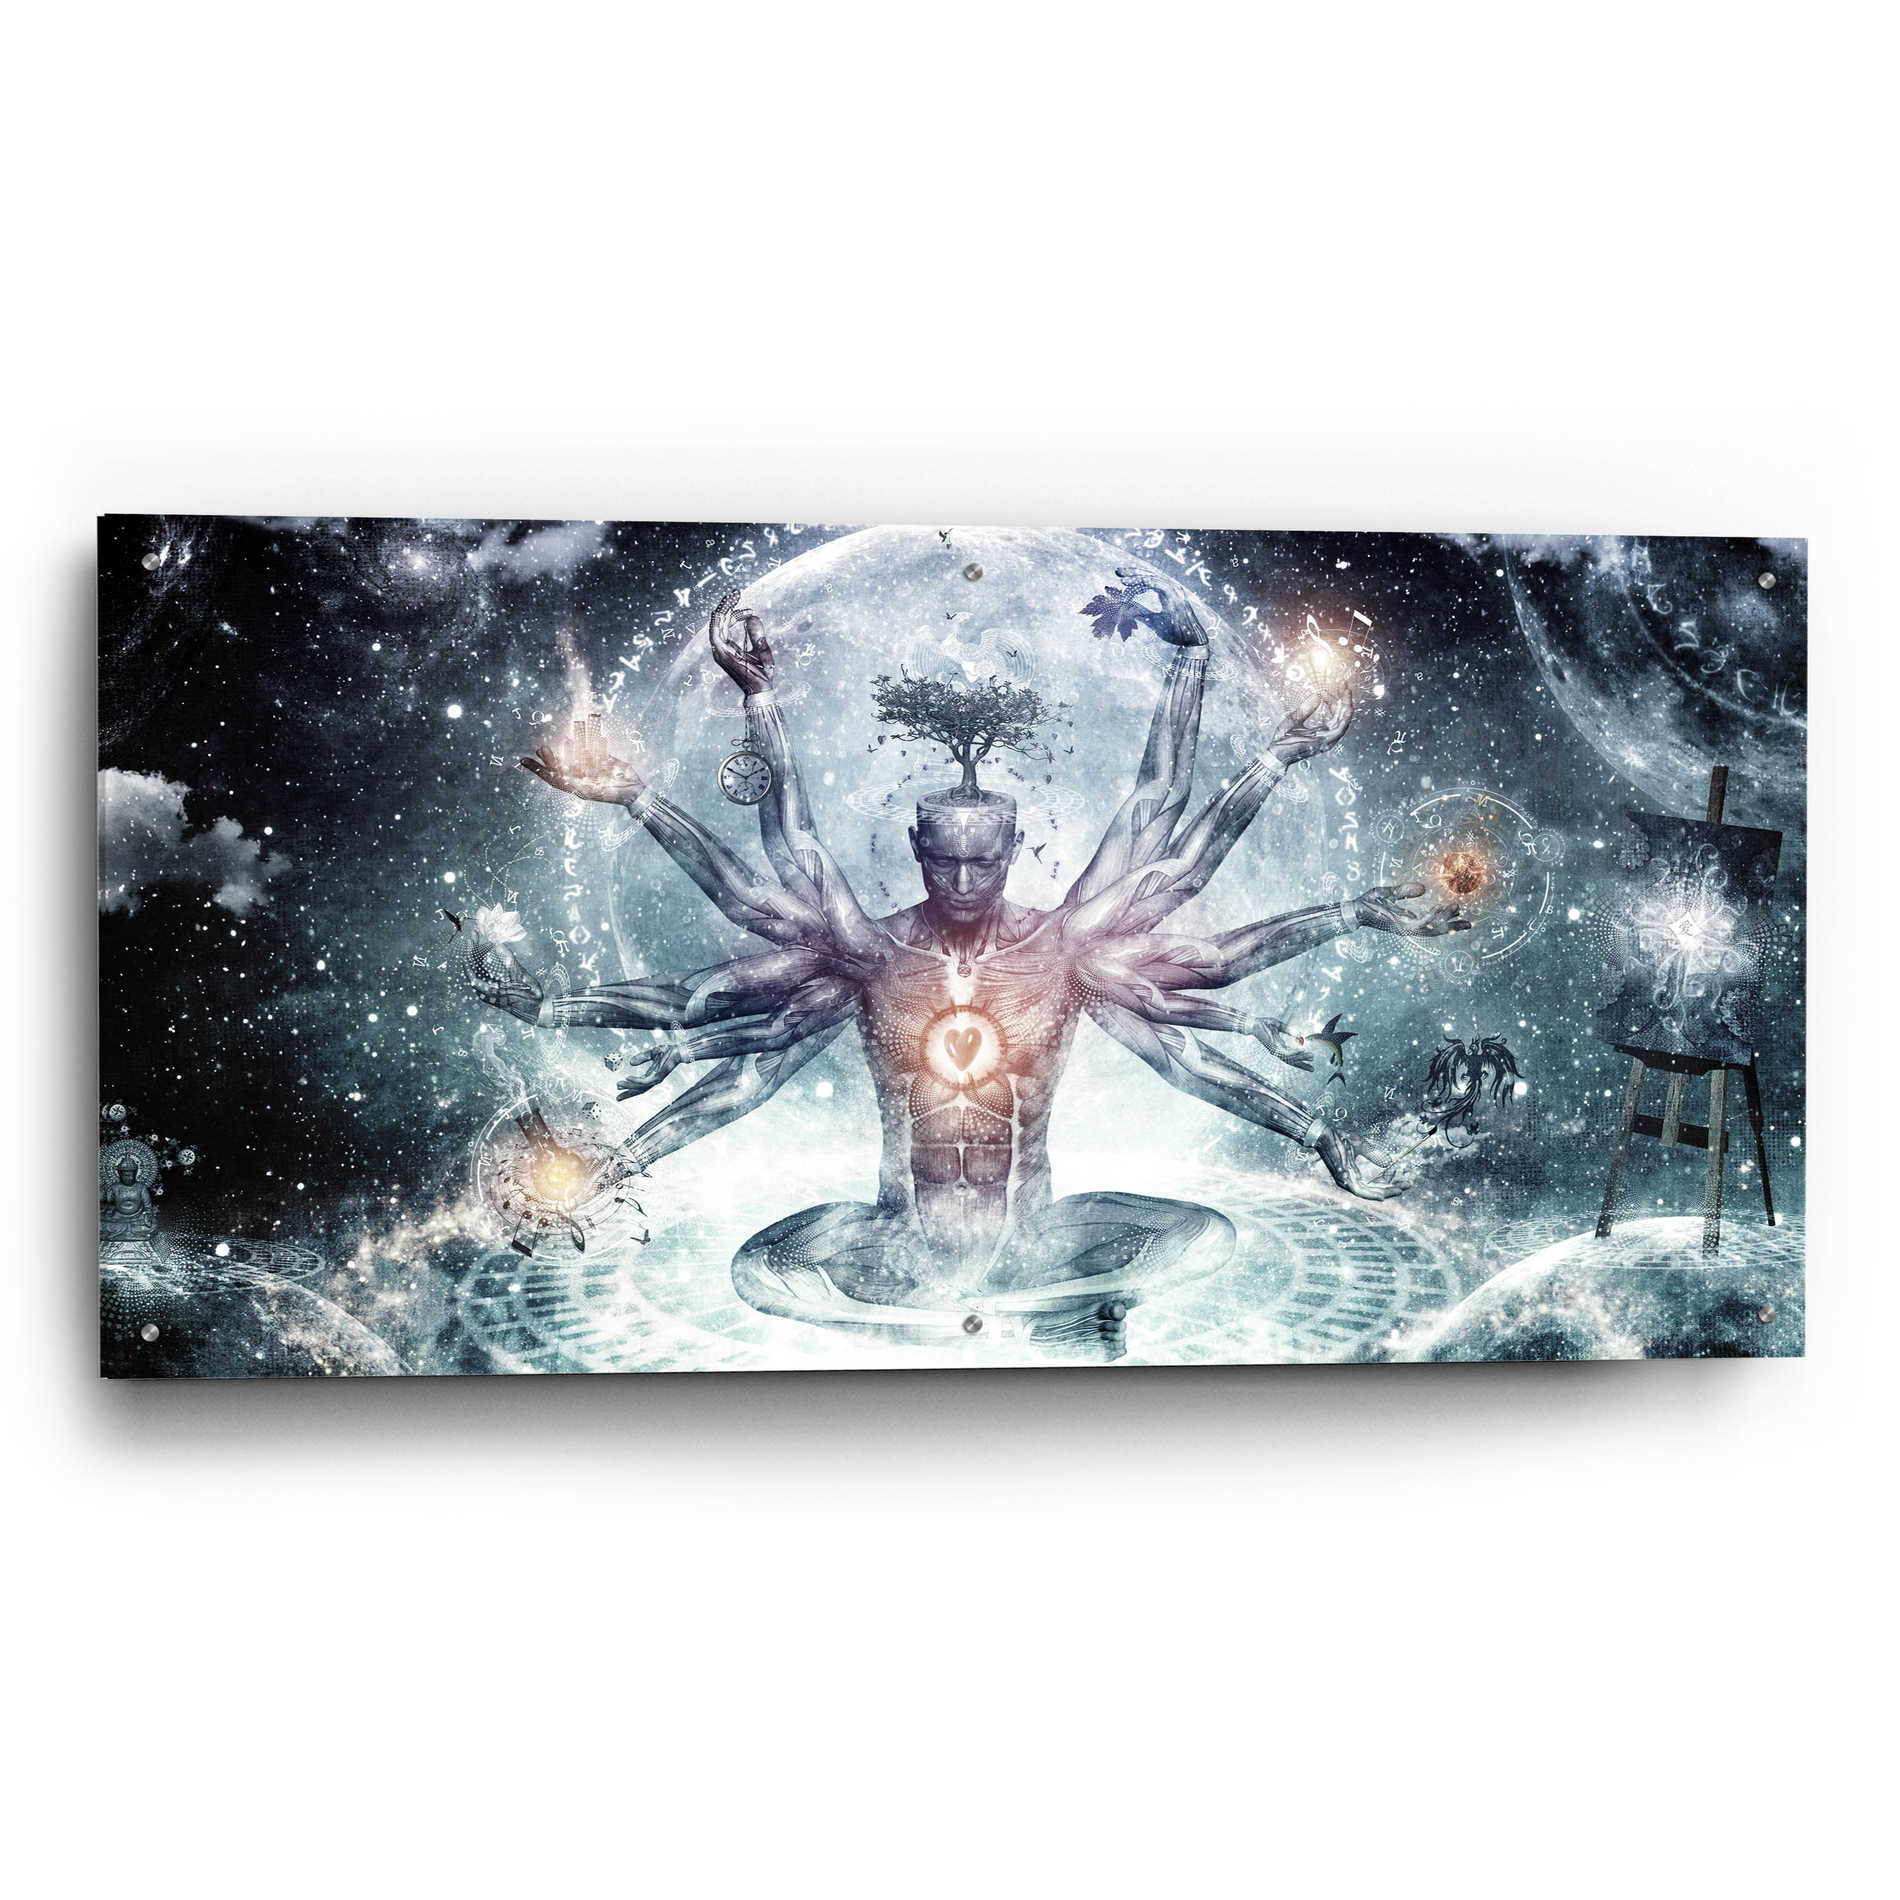 Epic Art 'The Neverending Dreamer' by Cameron Gray, Acrylic Glass Wall Art,48x24